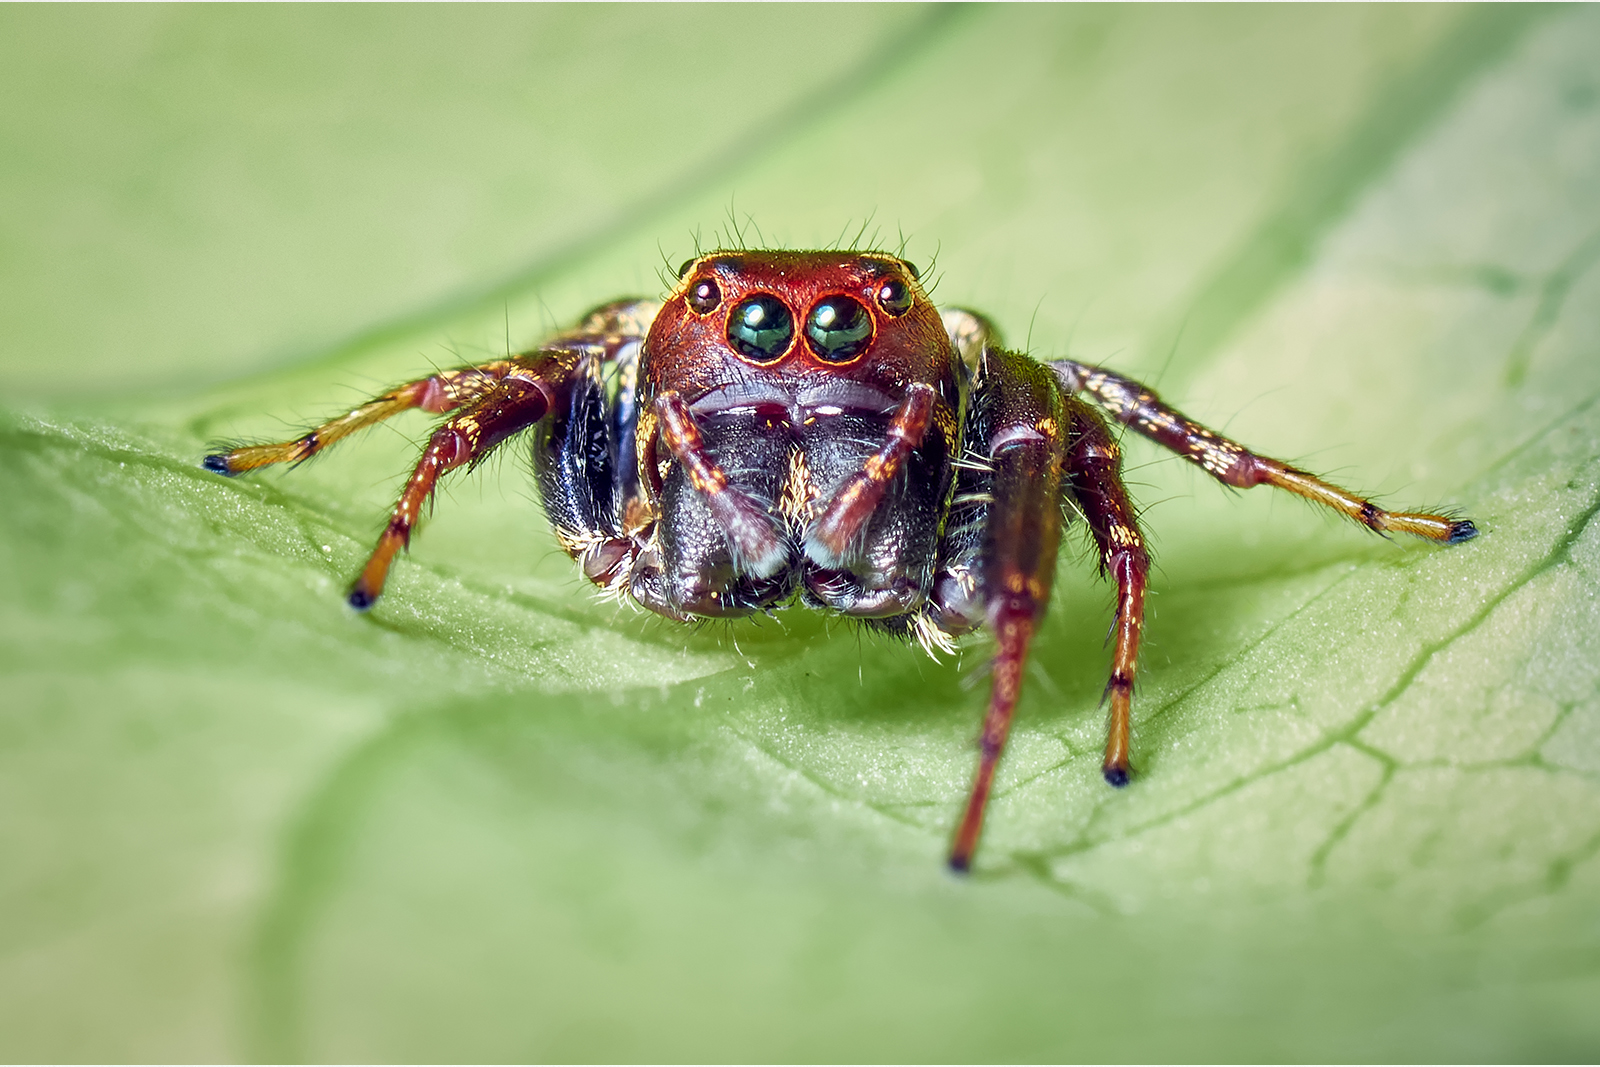 Do Spiders Feel Pain When You Kill Them?